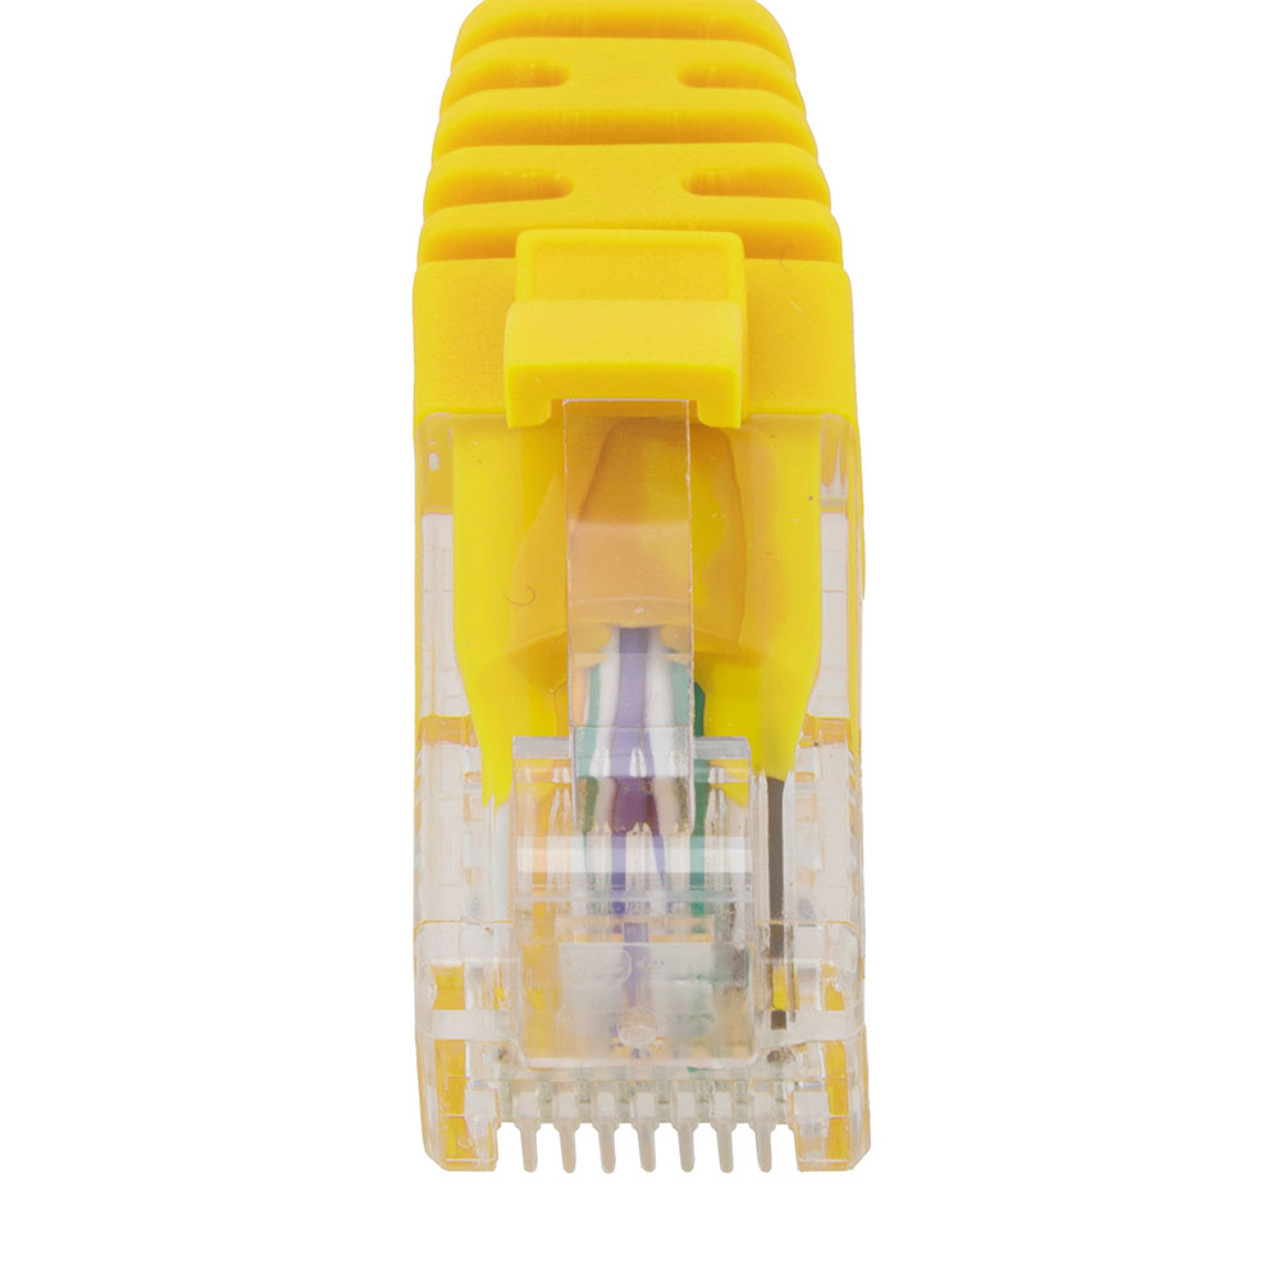 Ethernet Patch Cable CAT5E, UTP, 24AWG, 7 Ft,  10 pack, Yellow